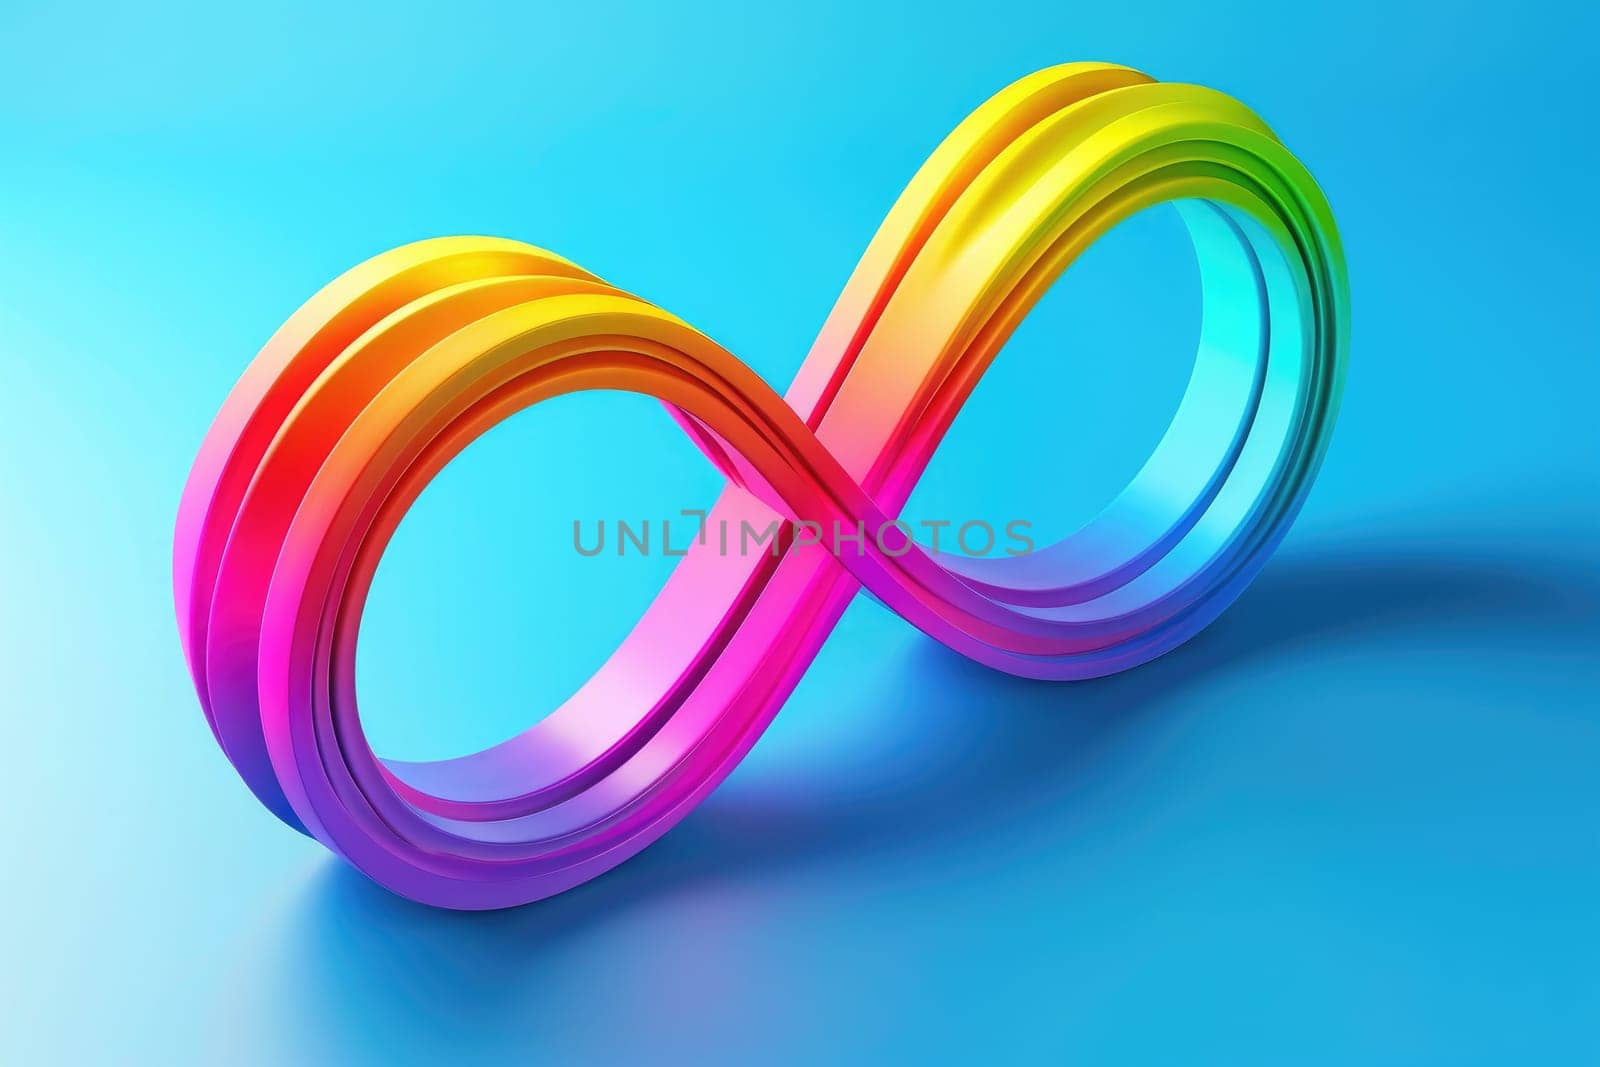 World autism awareness day background. 3D Rainbow colored infinity on blue background